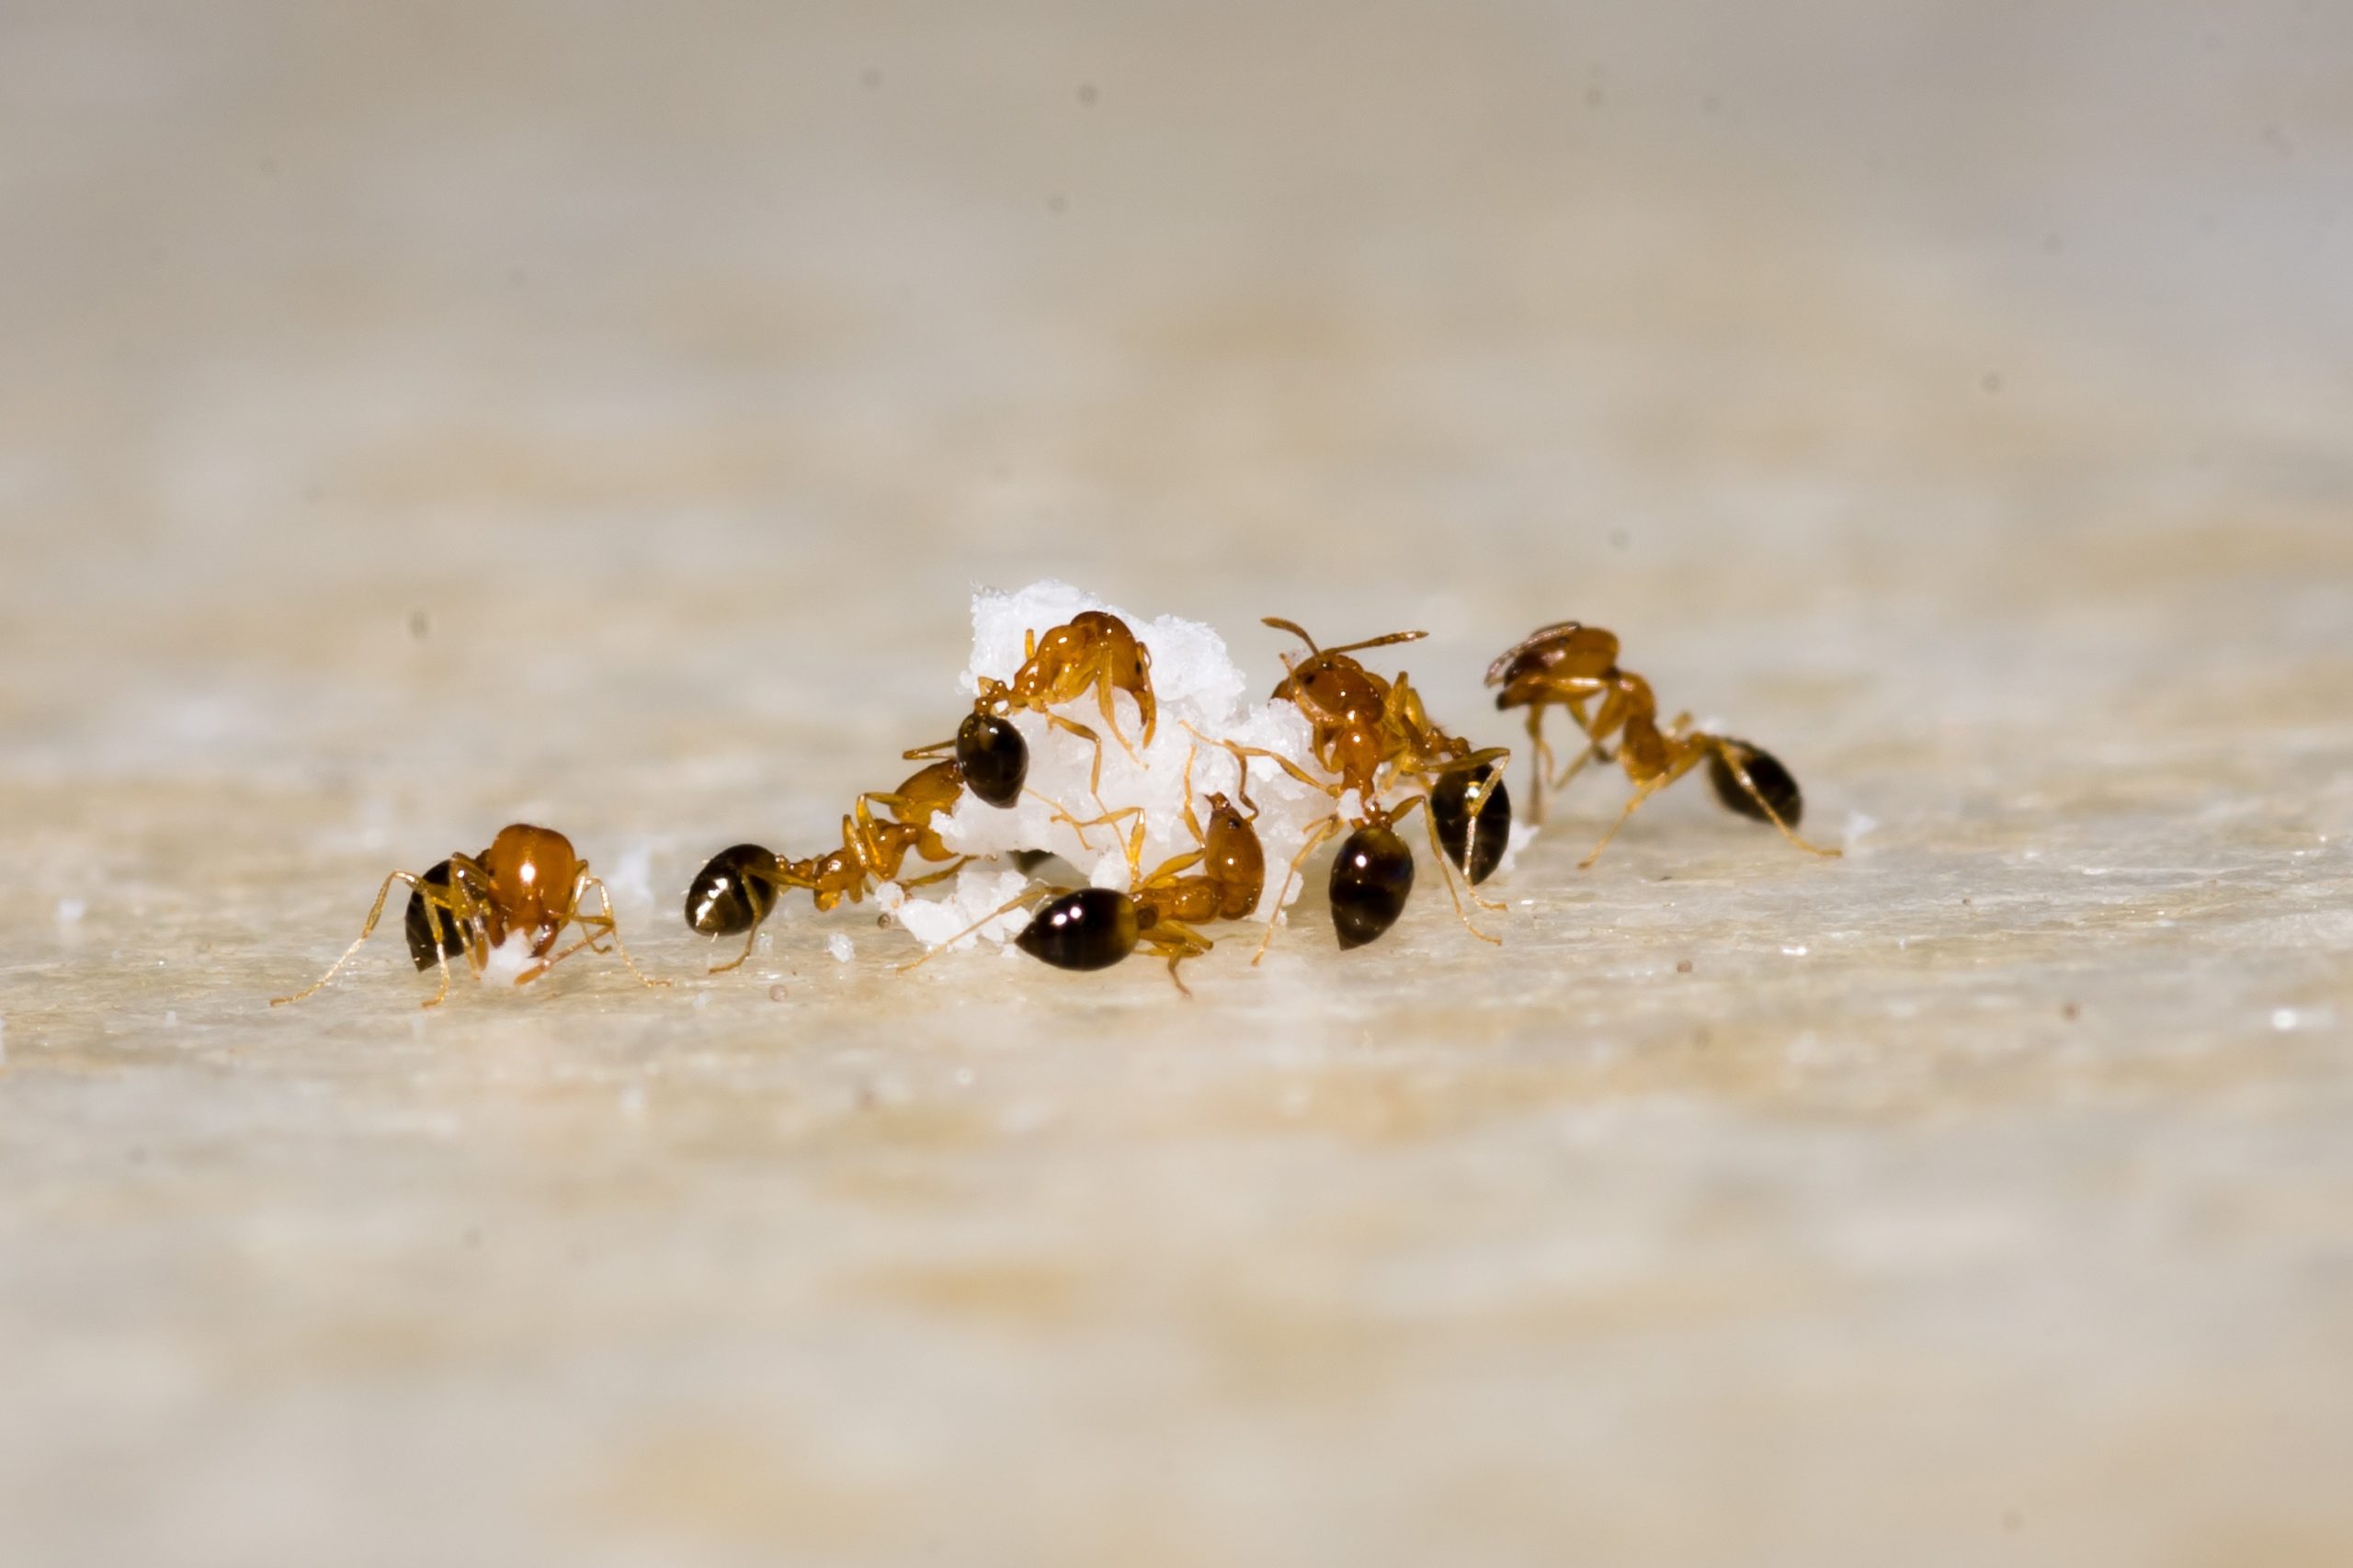 Sweet Solutions: How to Kill Sugar Ants and Eradicate Them From Your Home